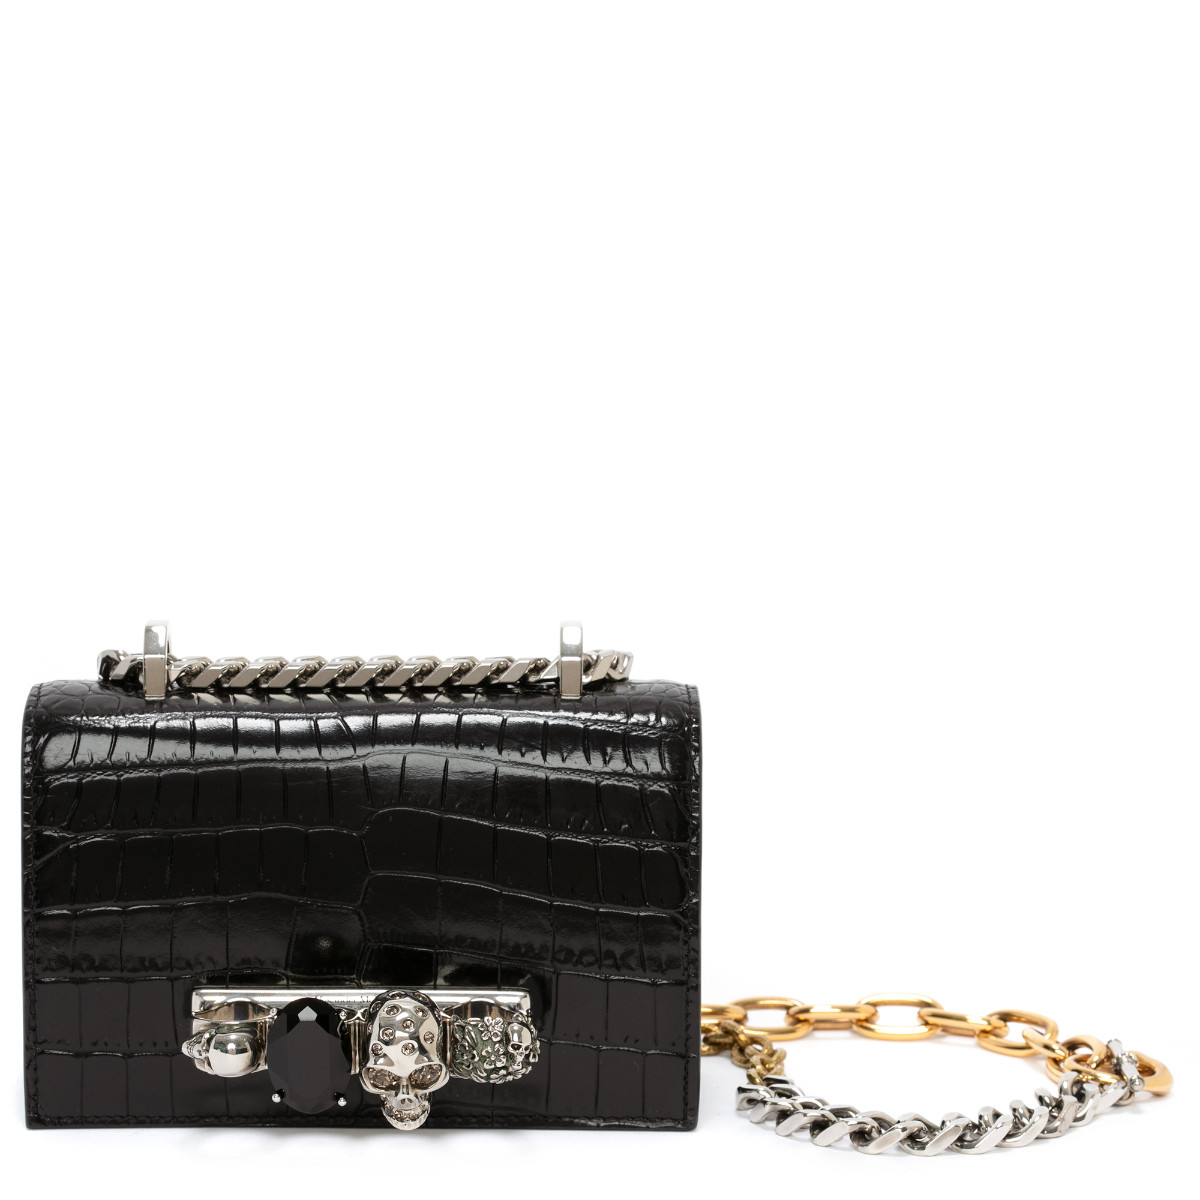 Lucia: The Jewelled Satchel